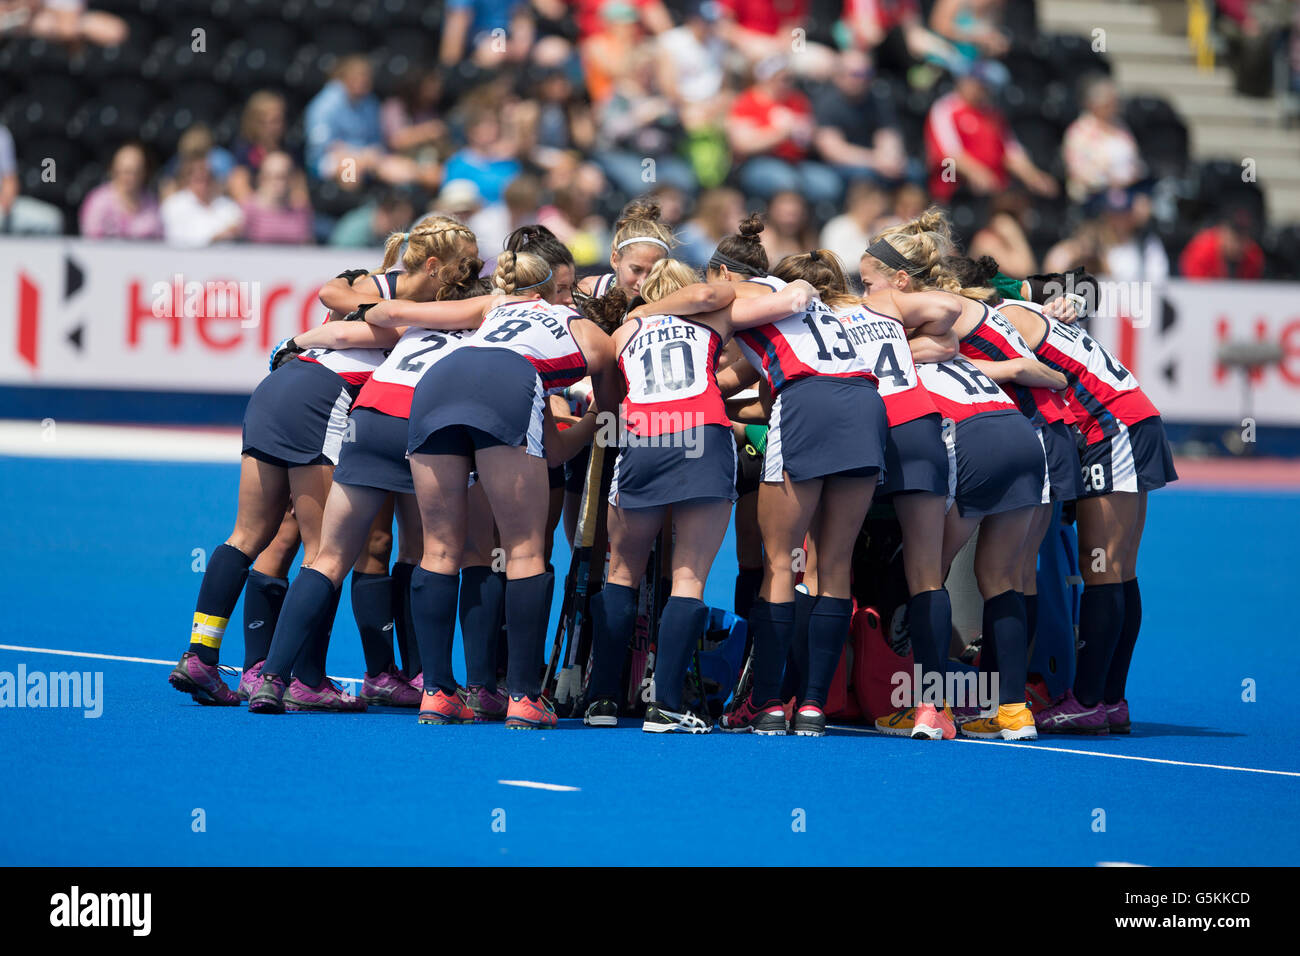 Investec Womens Hockey Champions Trophy 2016, Queen Elizabeth Olympic Park, June 2016. USA team huddle. Stock Photo